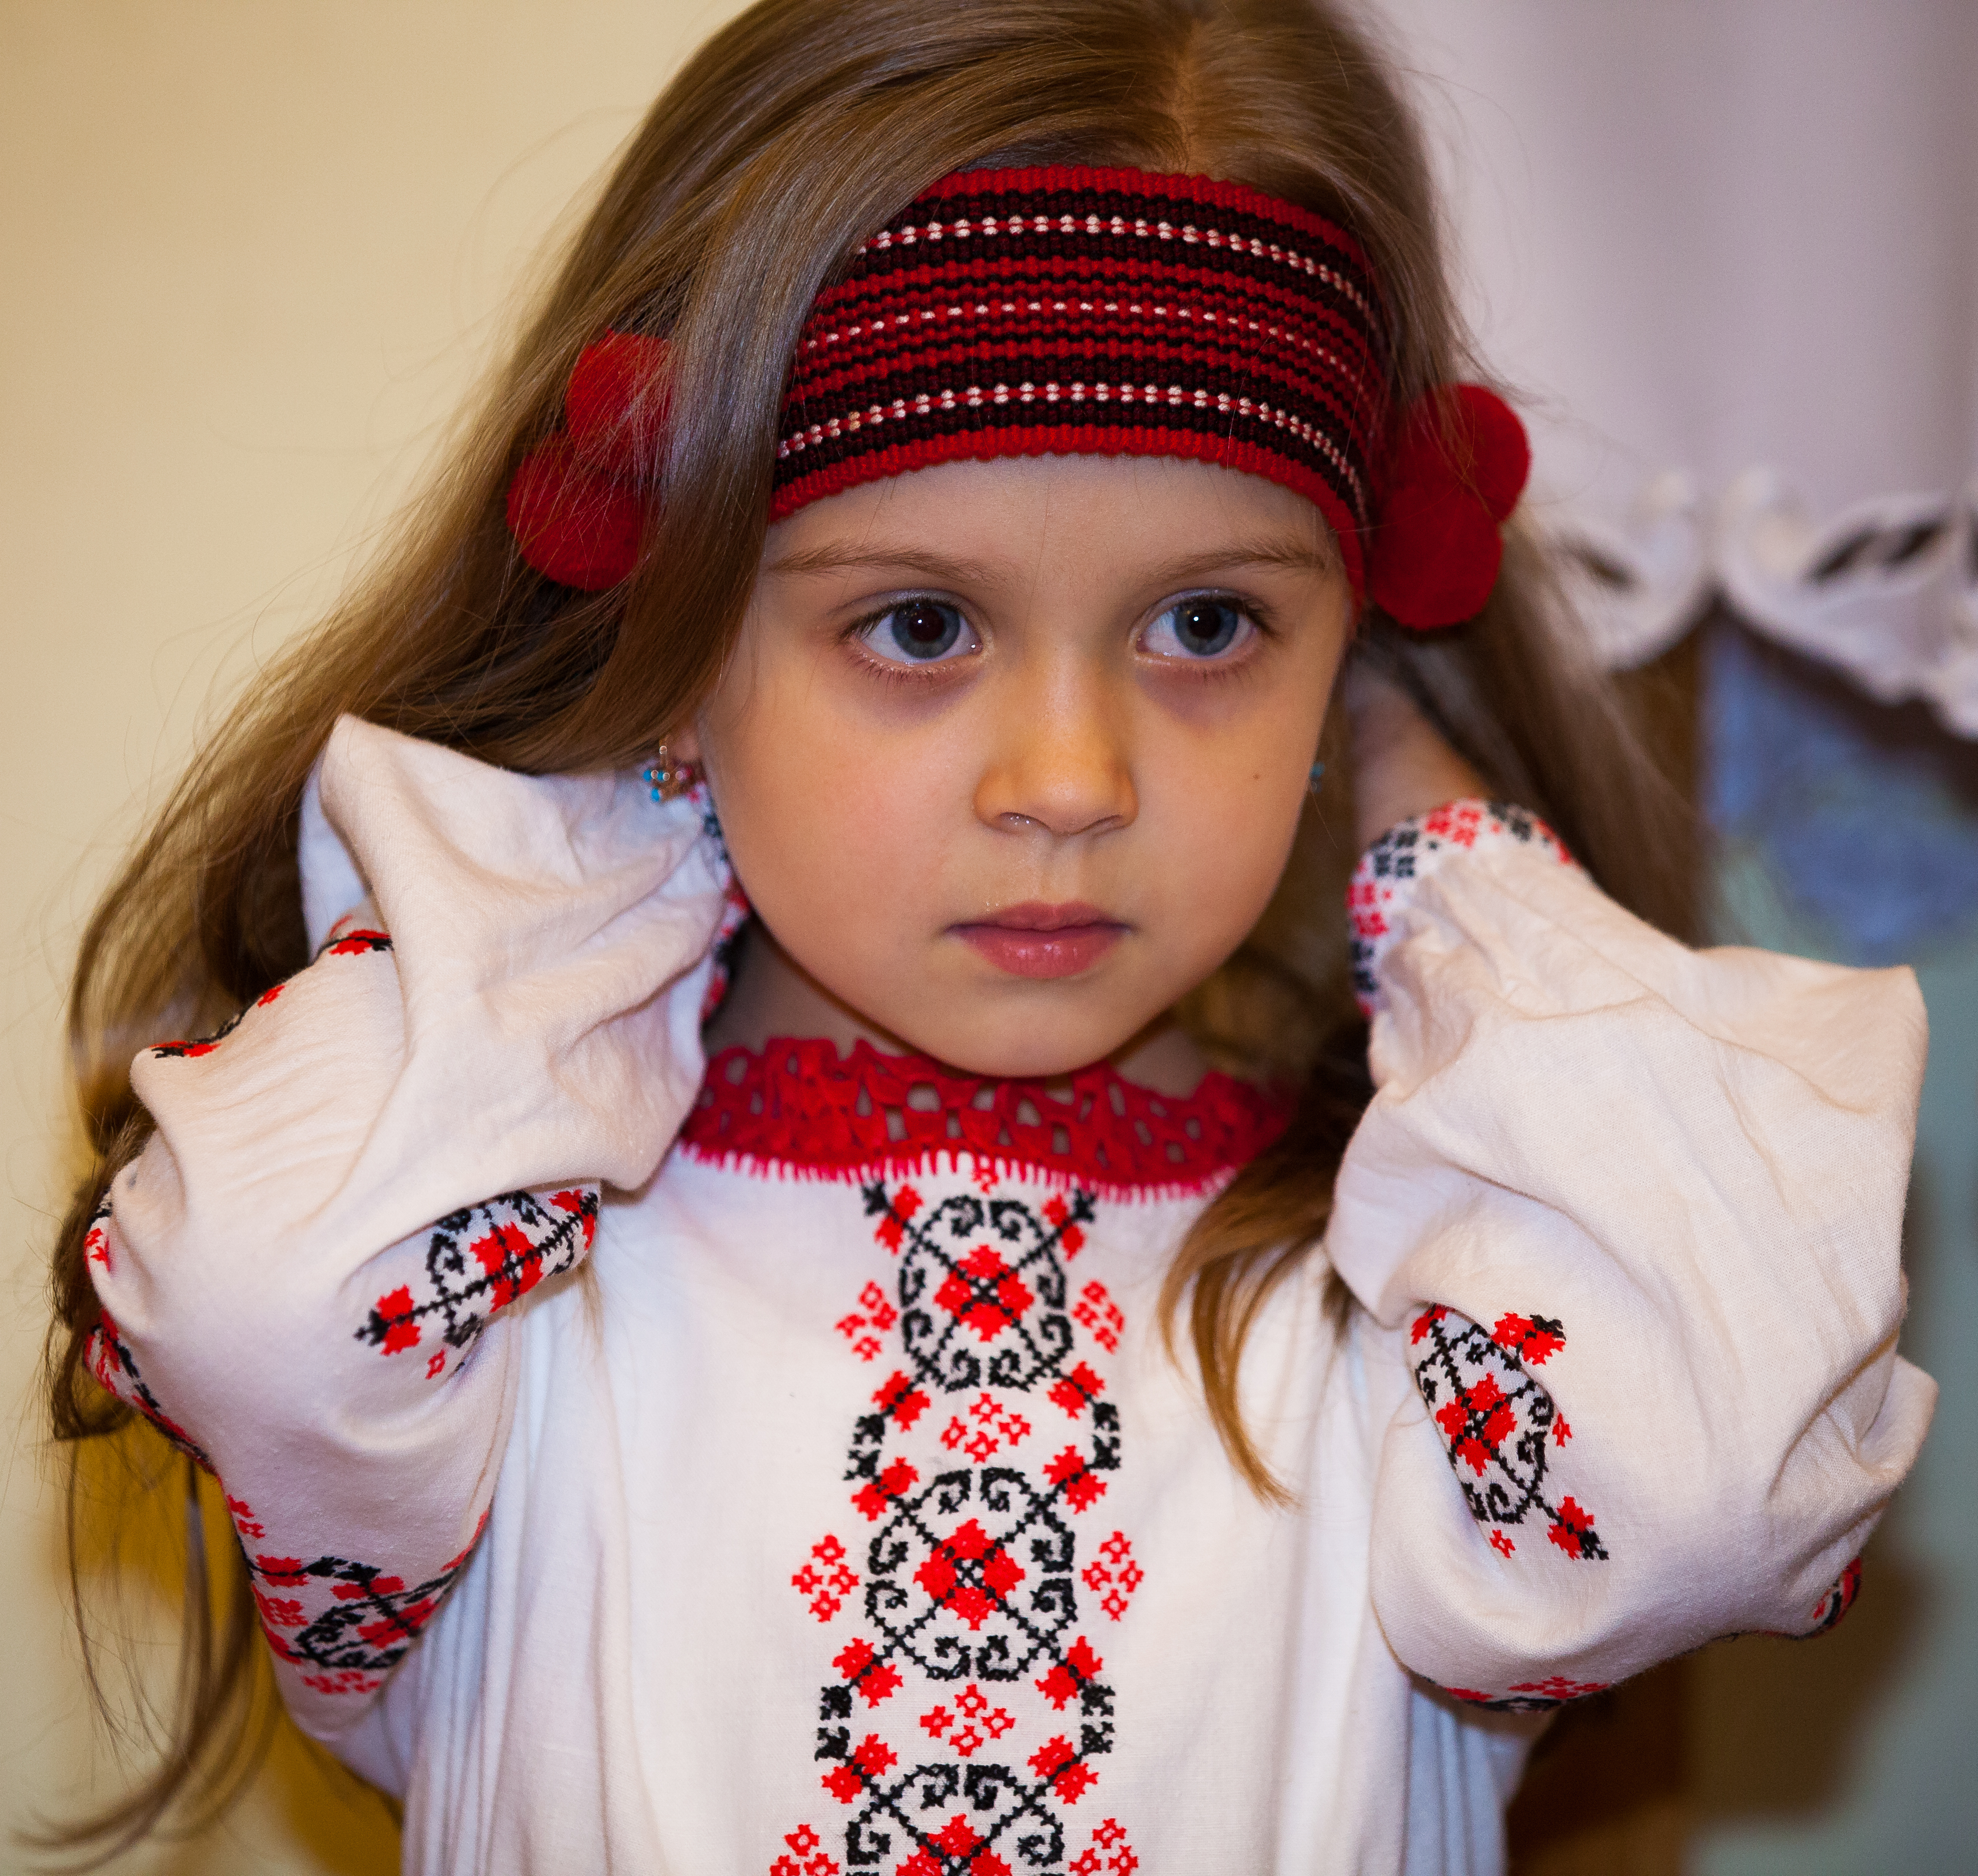 a cute blond child girl in a Catholic kindergarten photographed in November 2013, picture 7